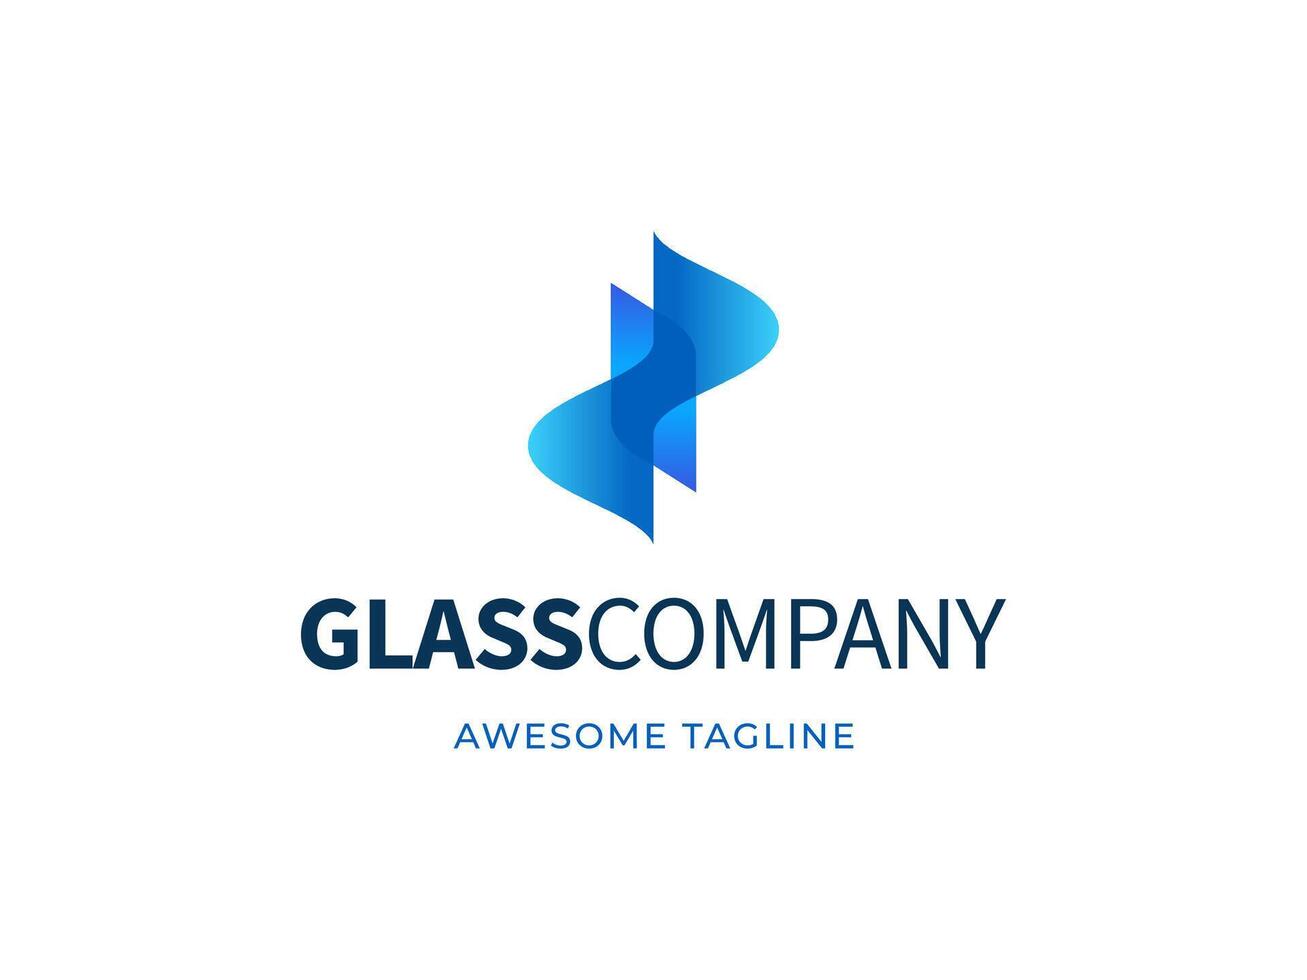 Abstract Shape Glass Logo service company icon, vector blue crystal glass works symbol or construction